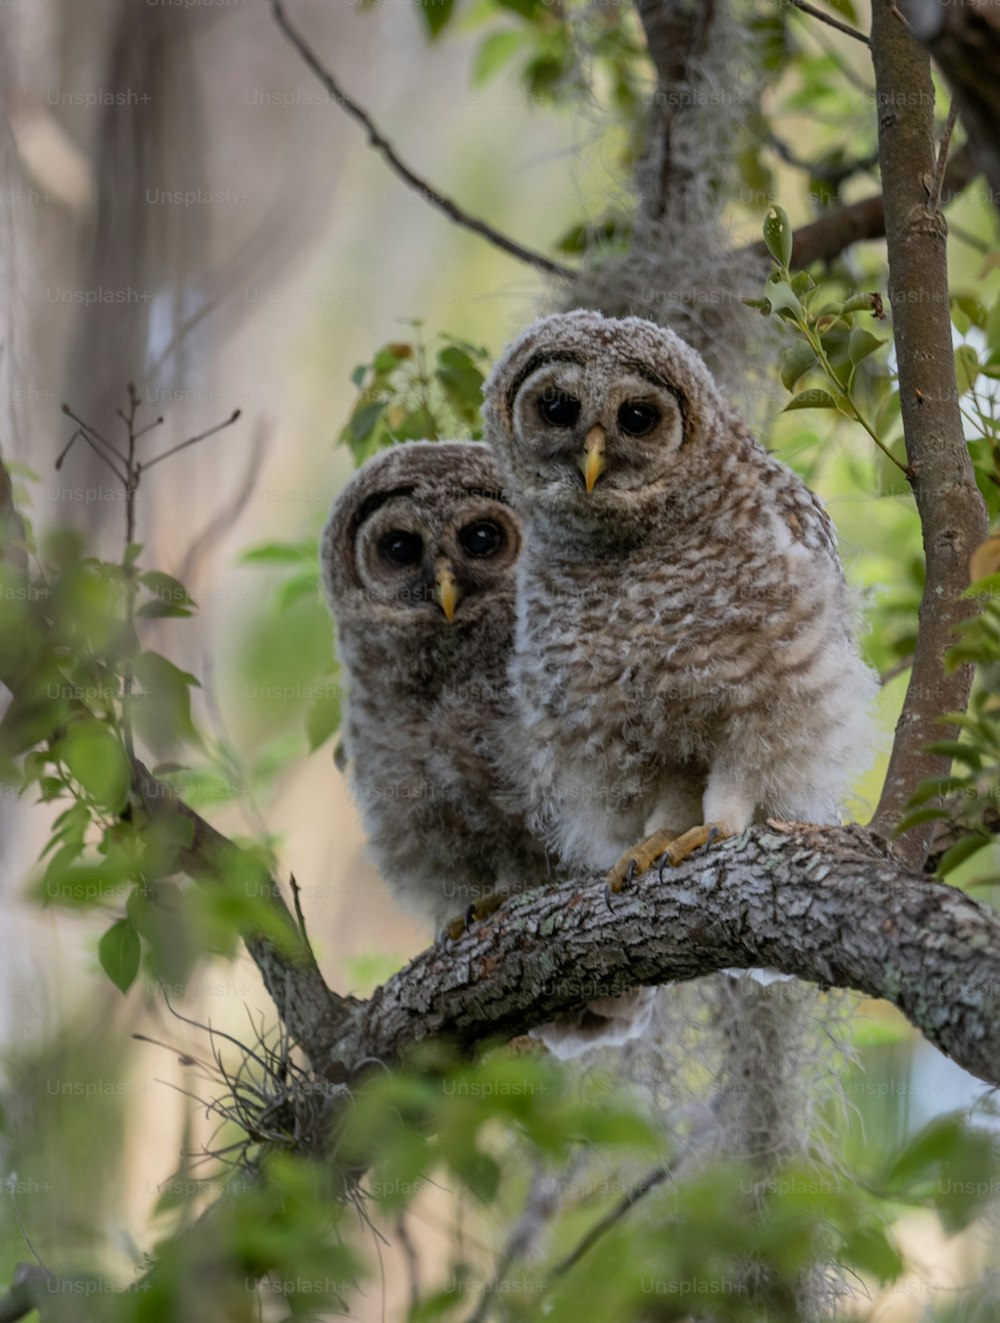 Barred owlets in southern Florida